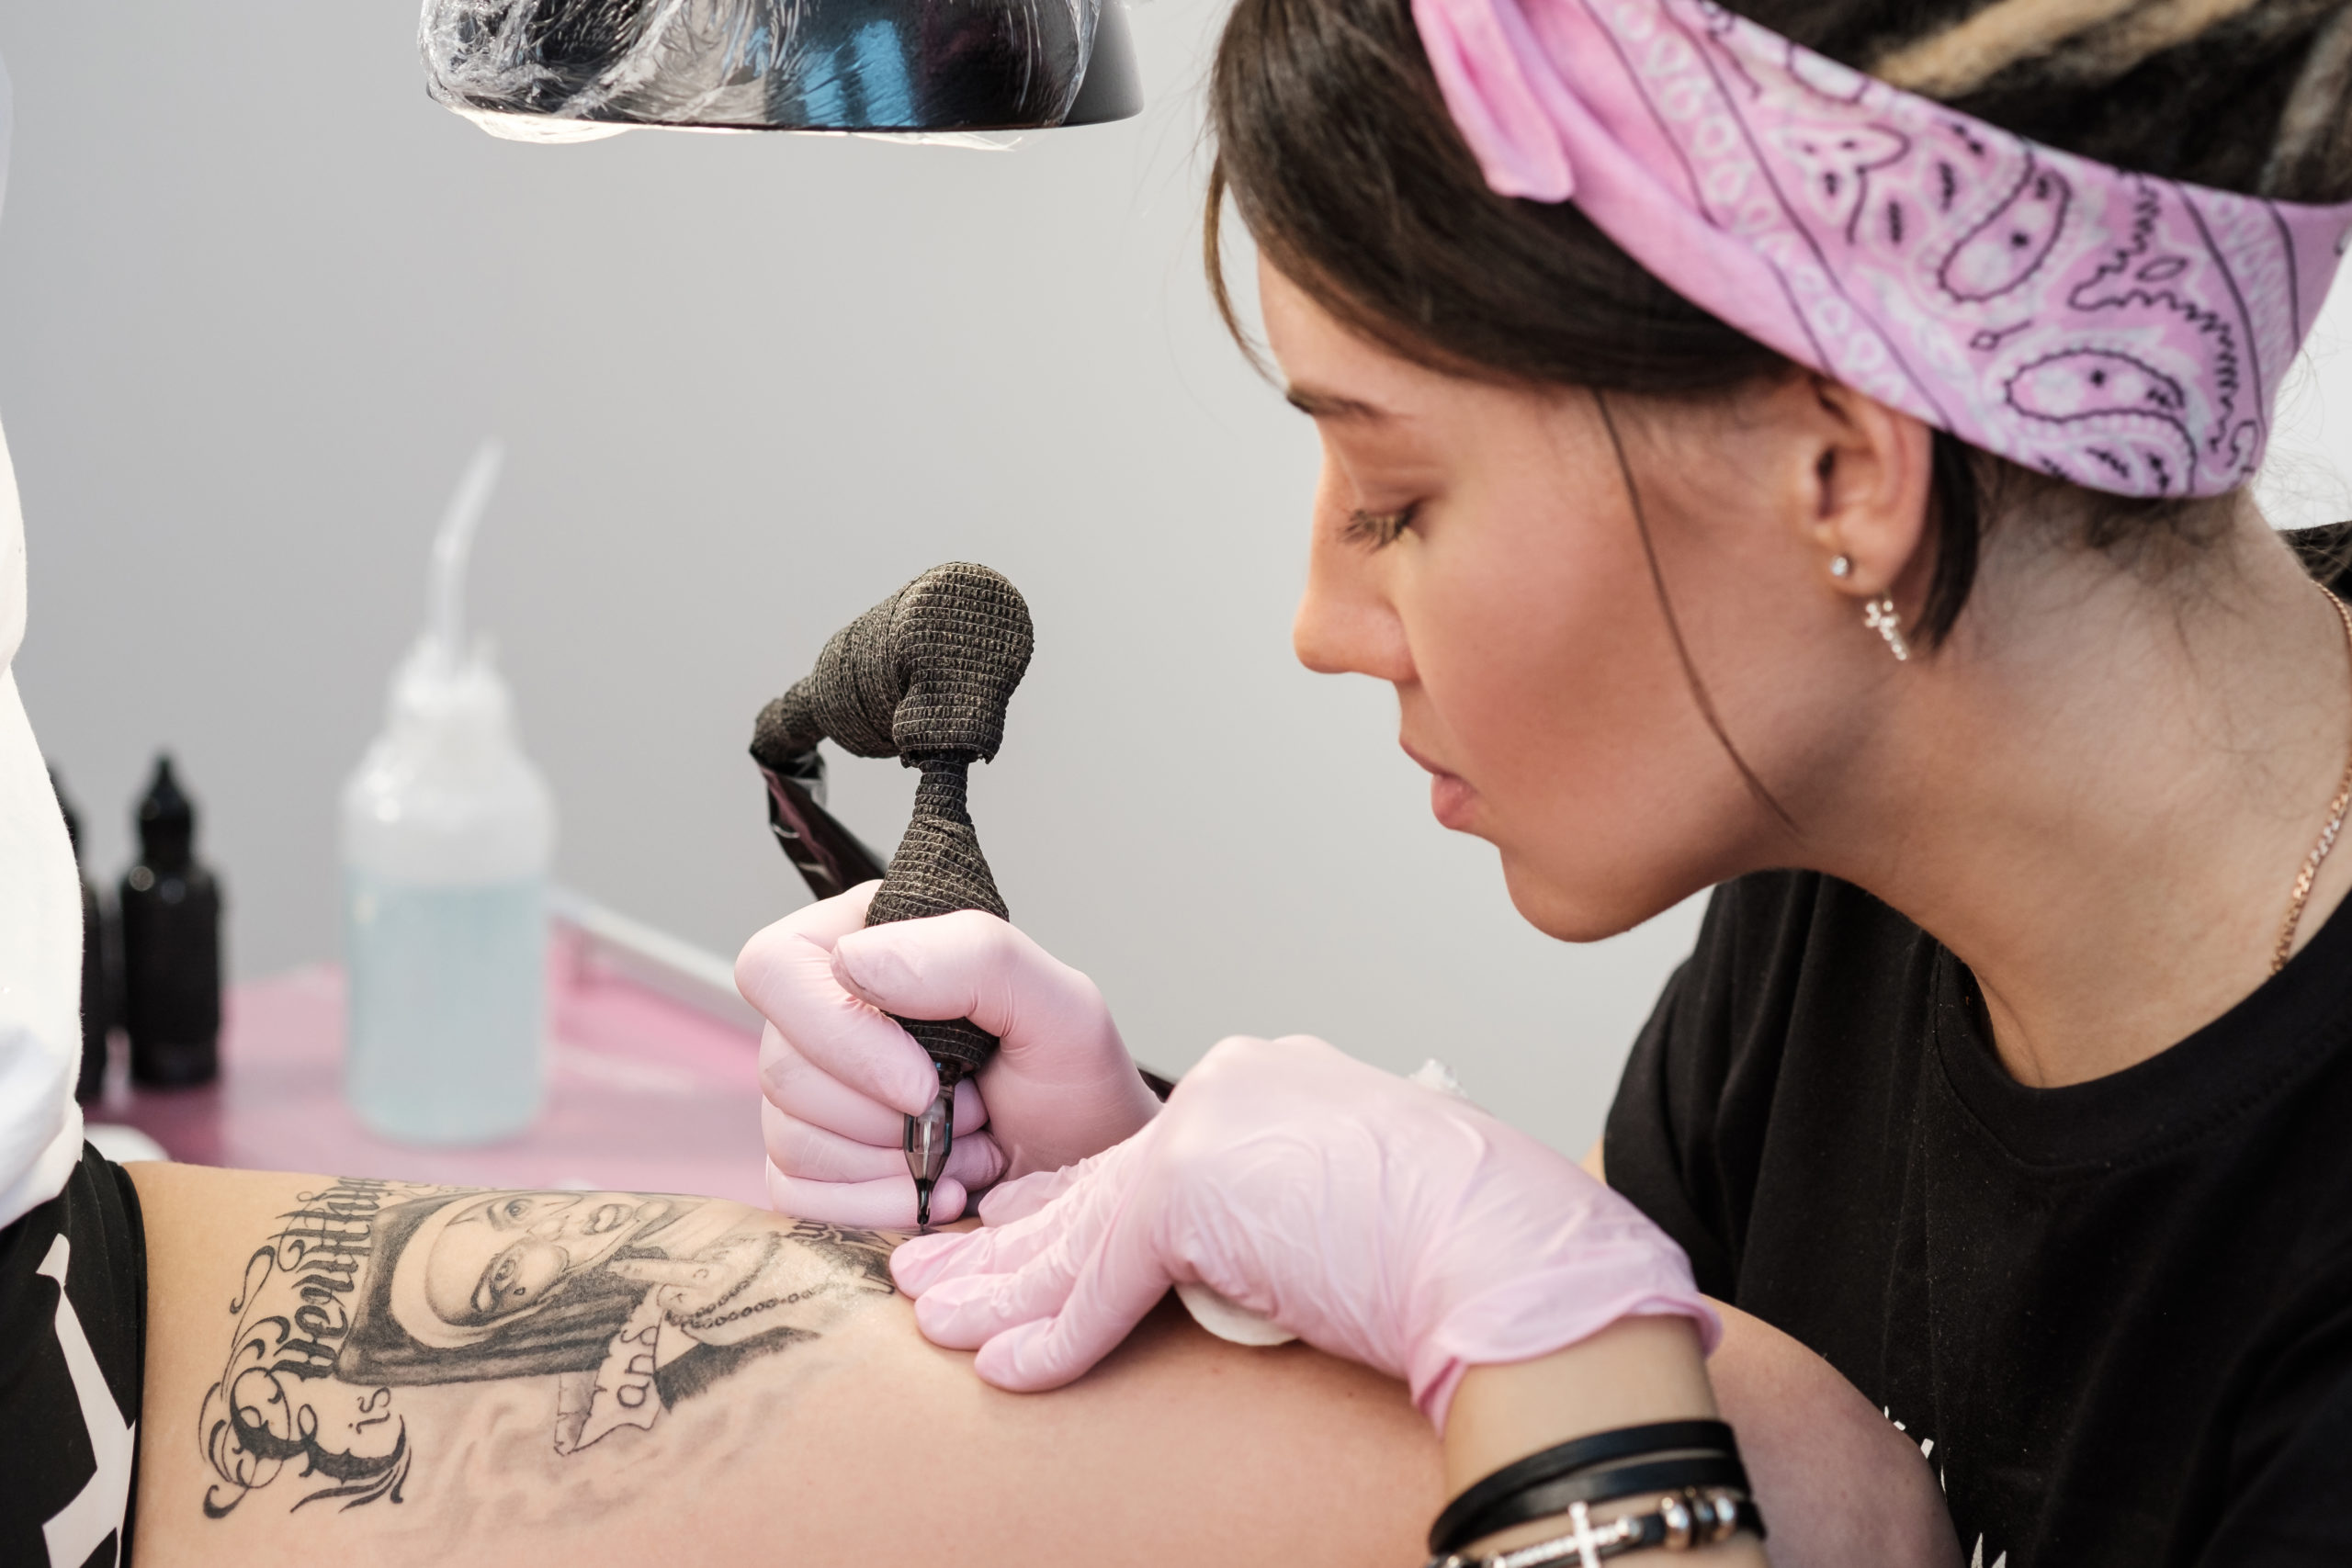 4 Very Popular Tattoo and Piercing Parlors in NYC - Female Tattoo artist wearing a pink headband and gloves giving a thigh tattoo